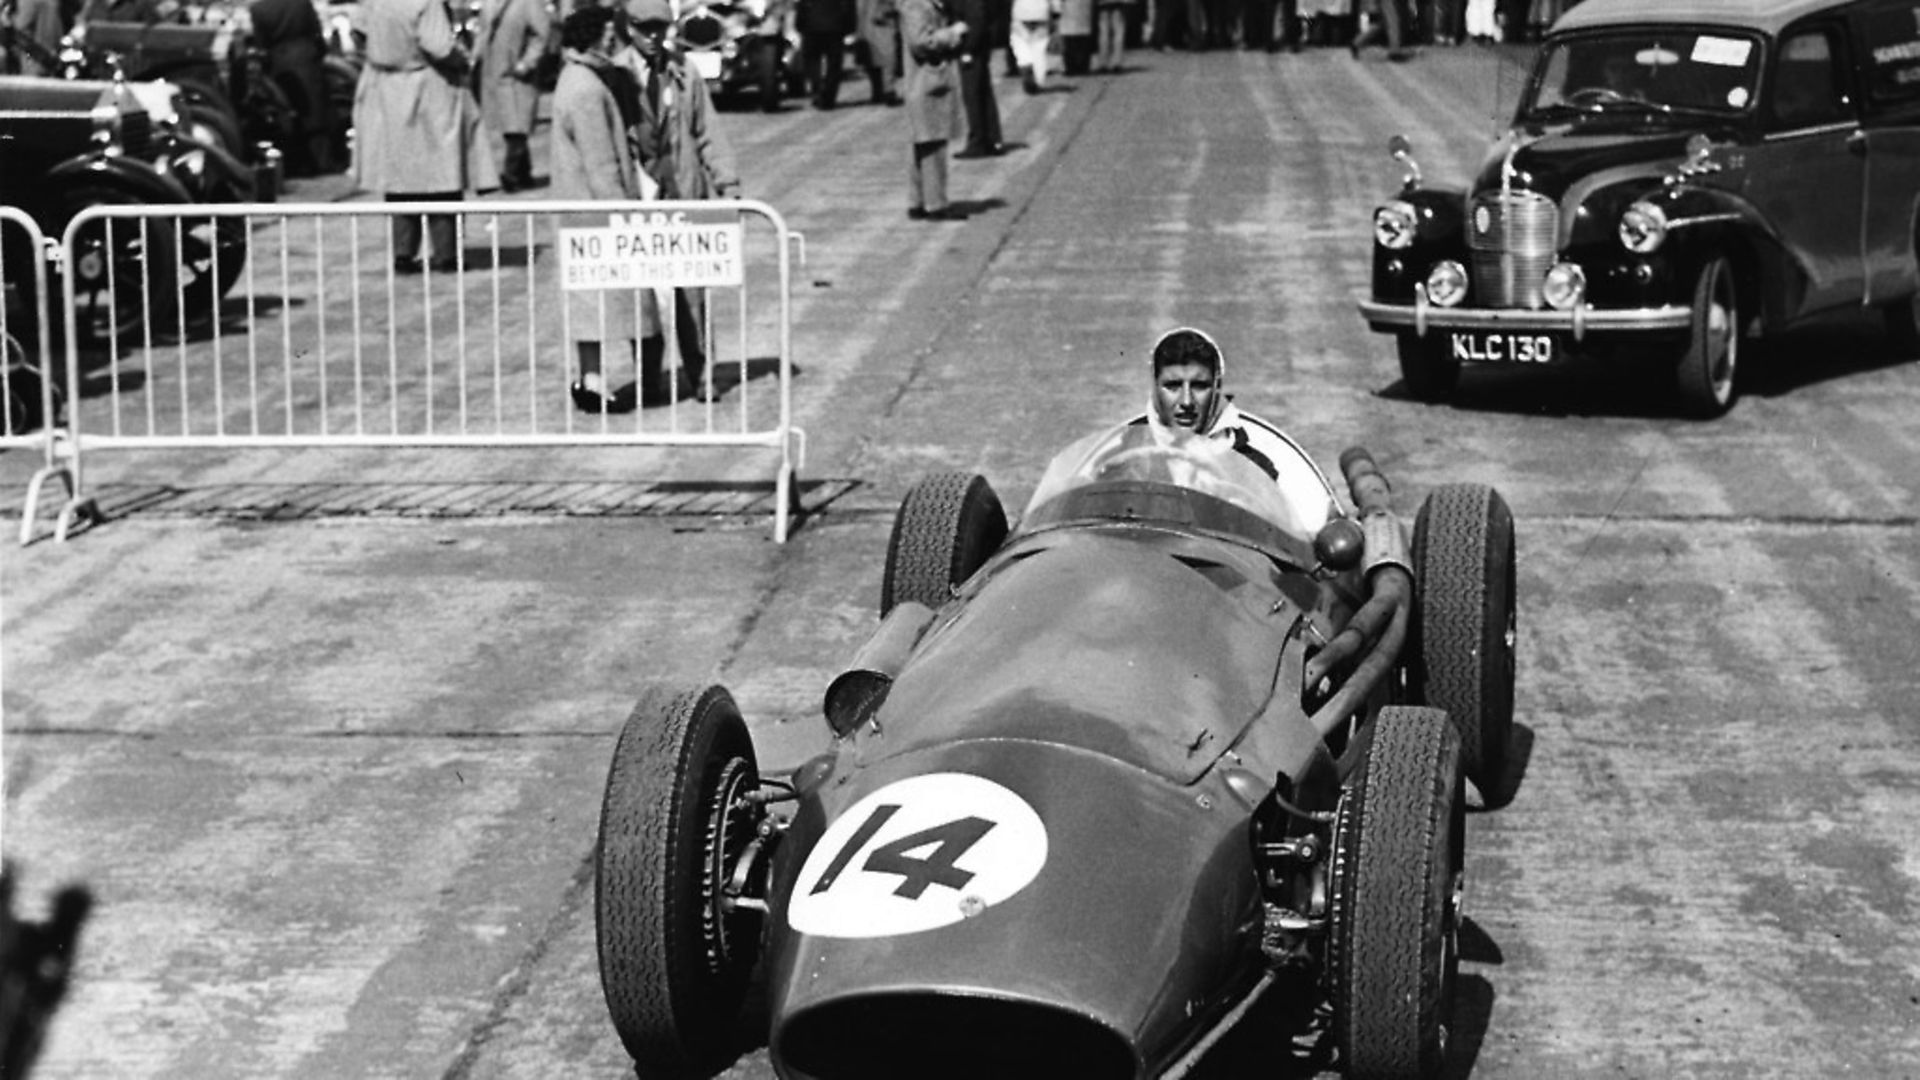 Italian racing driver Maria Teresa de Filippis, the first female to compete in Formula One, in her Maserati at the 11th Annual International Trophy Race at Silverstone, 3rd May 1959. (Photo by Keystone/Hulton Archive/Getty Images) - Credit: Getty Images